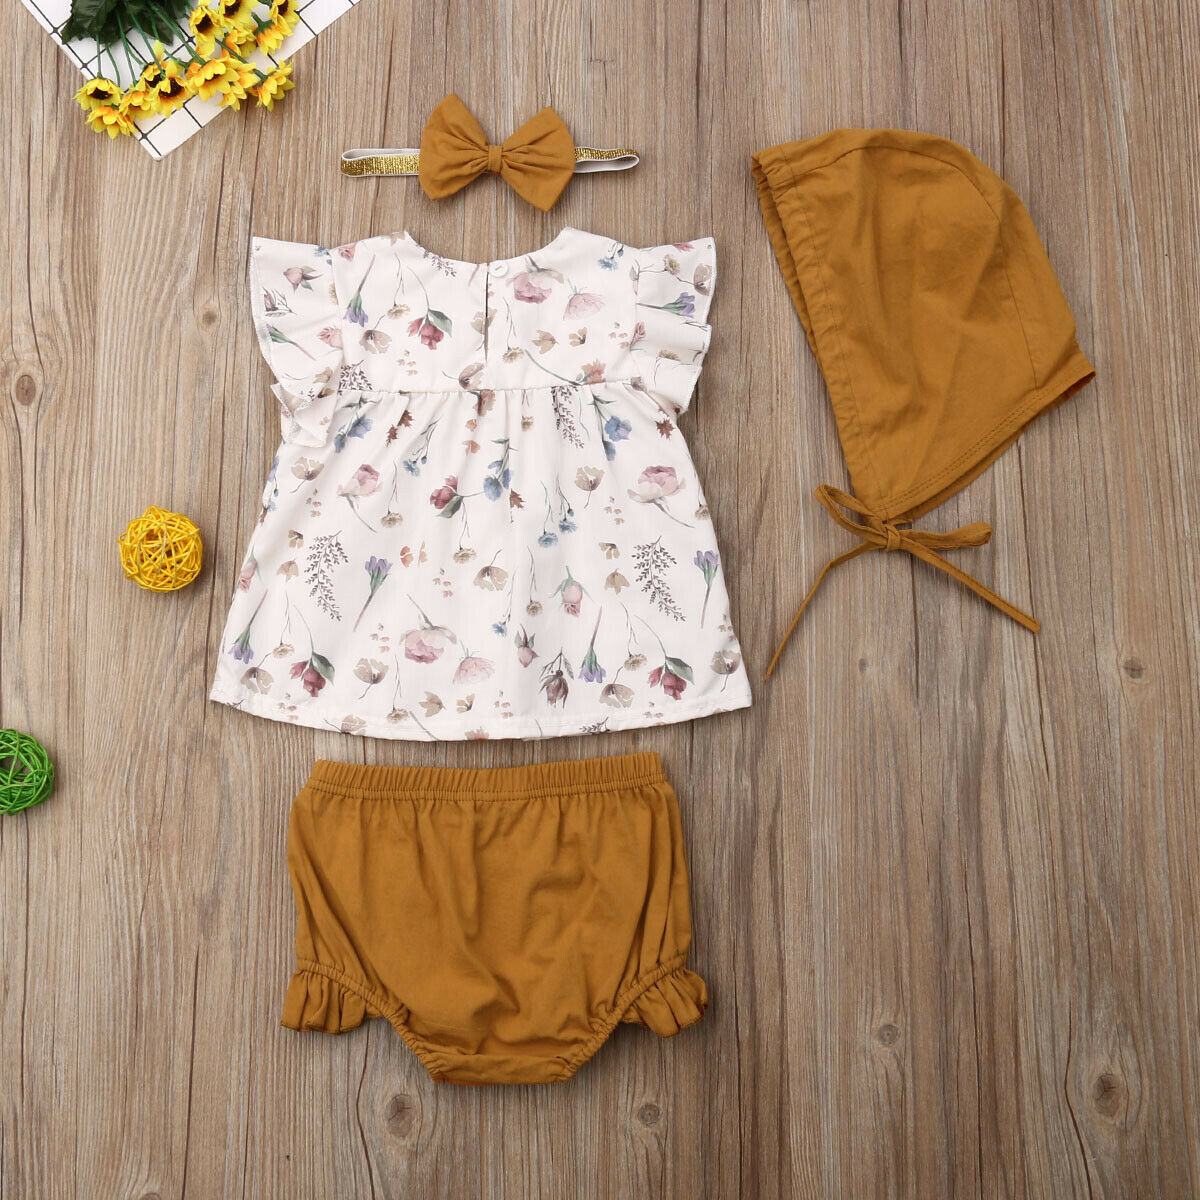 Baby's 4PCS Floral Top, Pants and Hat Outfit Set